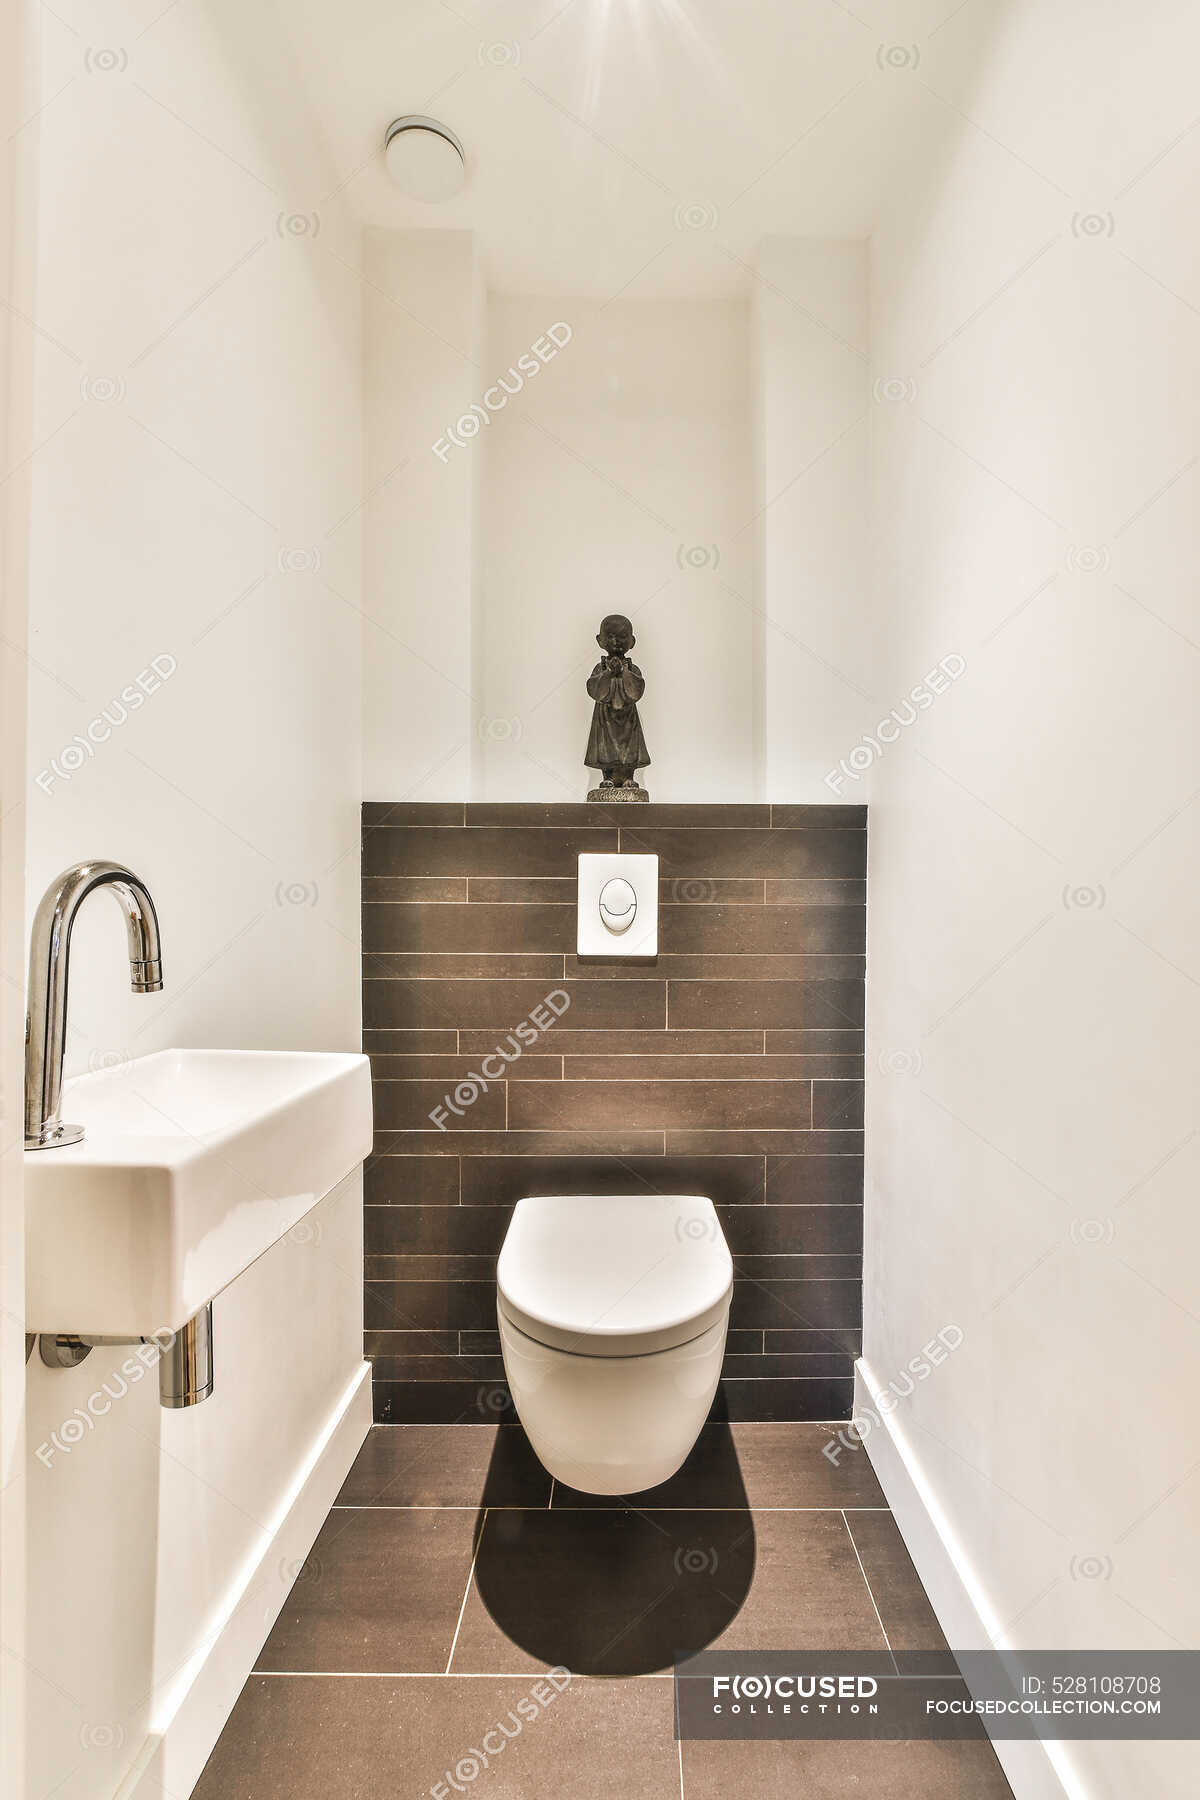 Wegversperring genie afdrijven Creative design of bathroom with toilet bowl under statuette against  washstand with faucet in light house — minimalist, contrast - Stock Photo |  #528108708